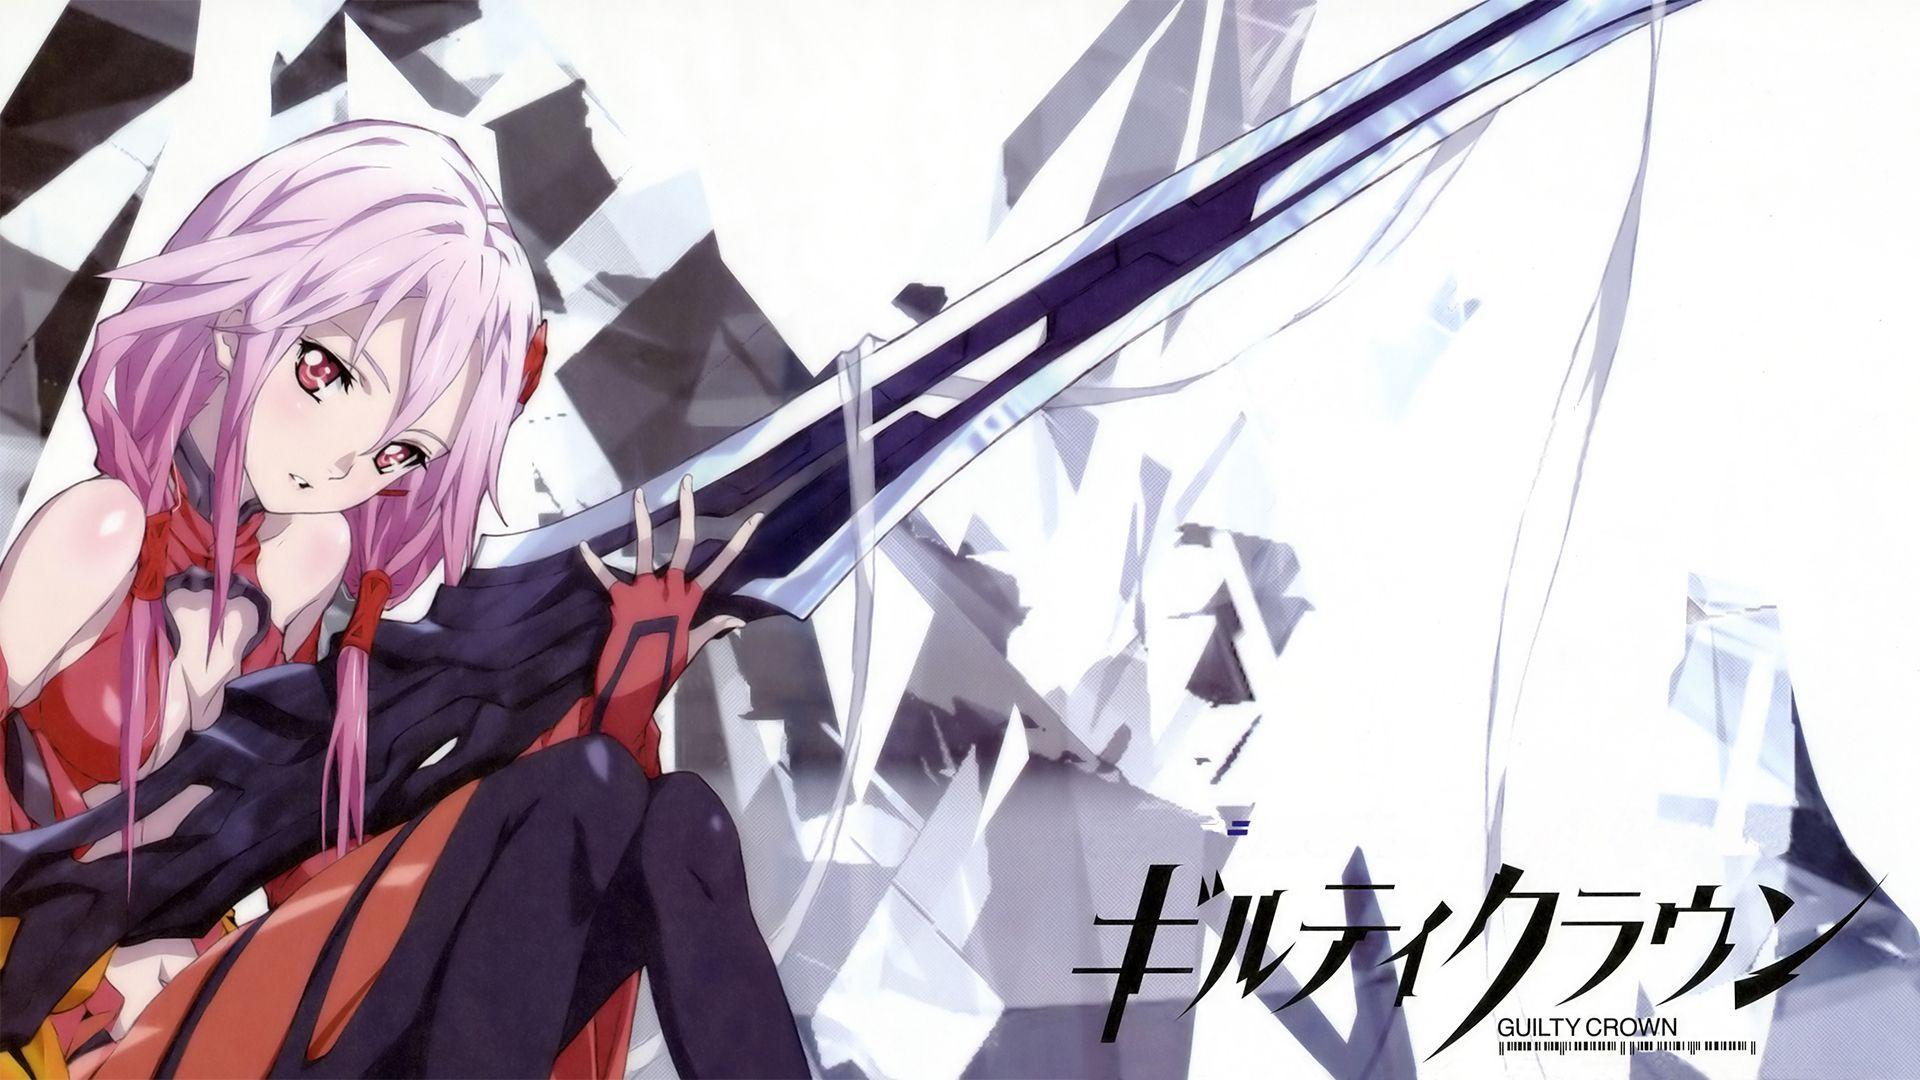 Guilty Crown HD Wallpaper for Free